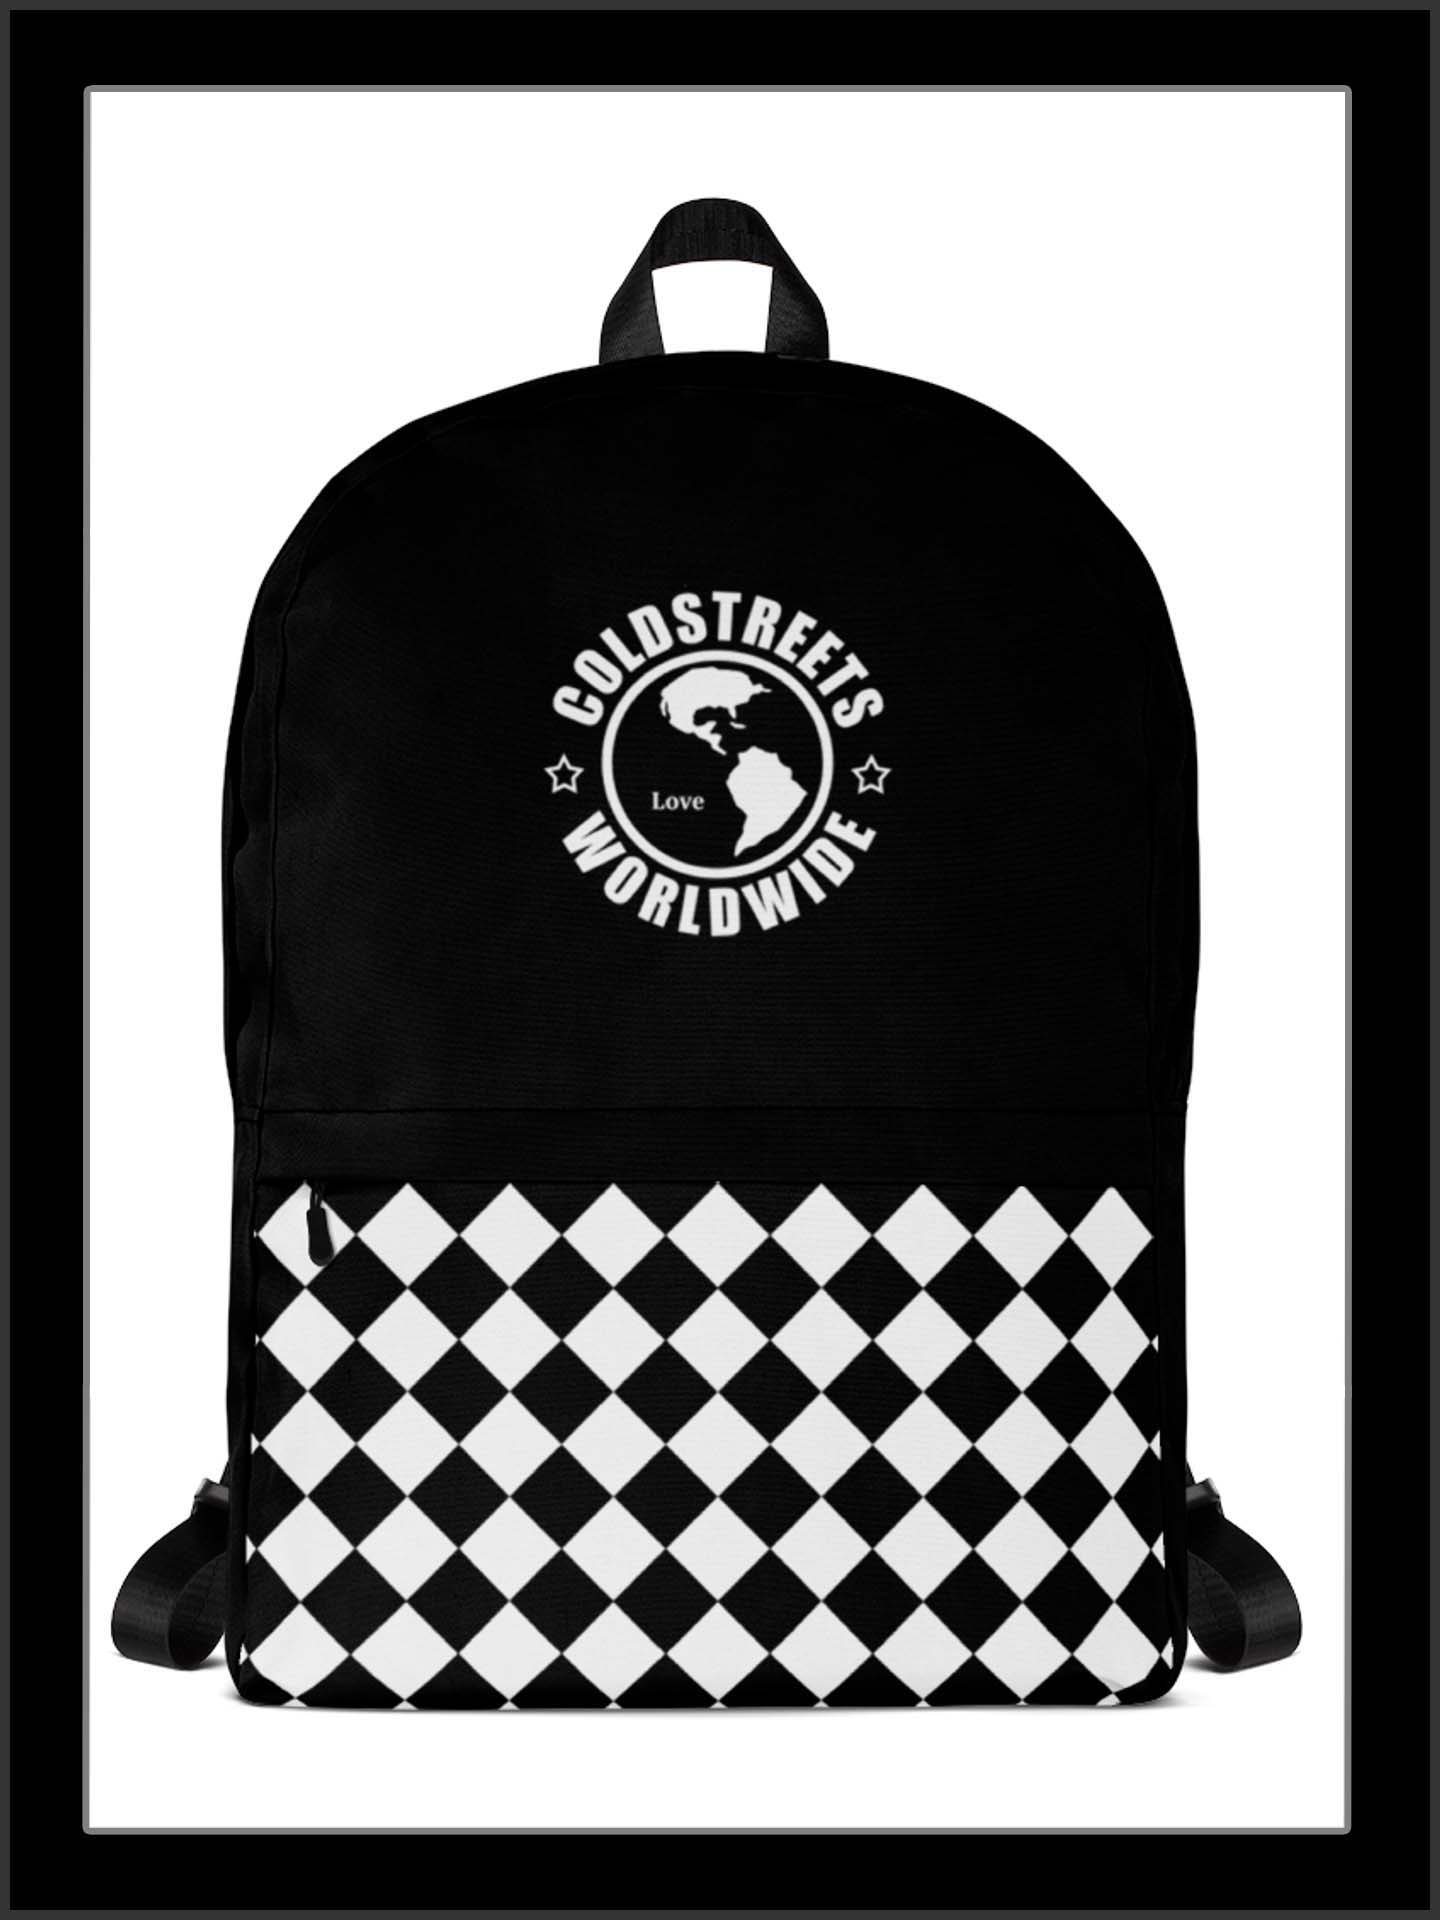 Cold Streets New Hampshire Backpacks